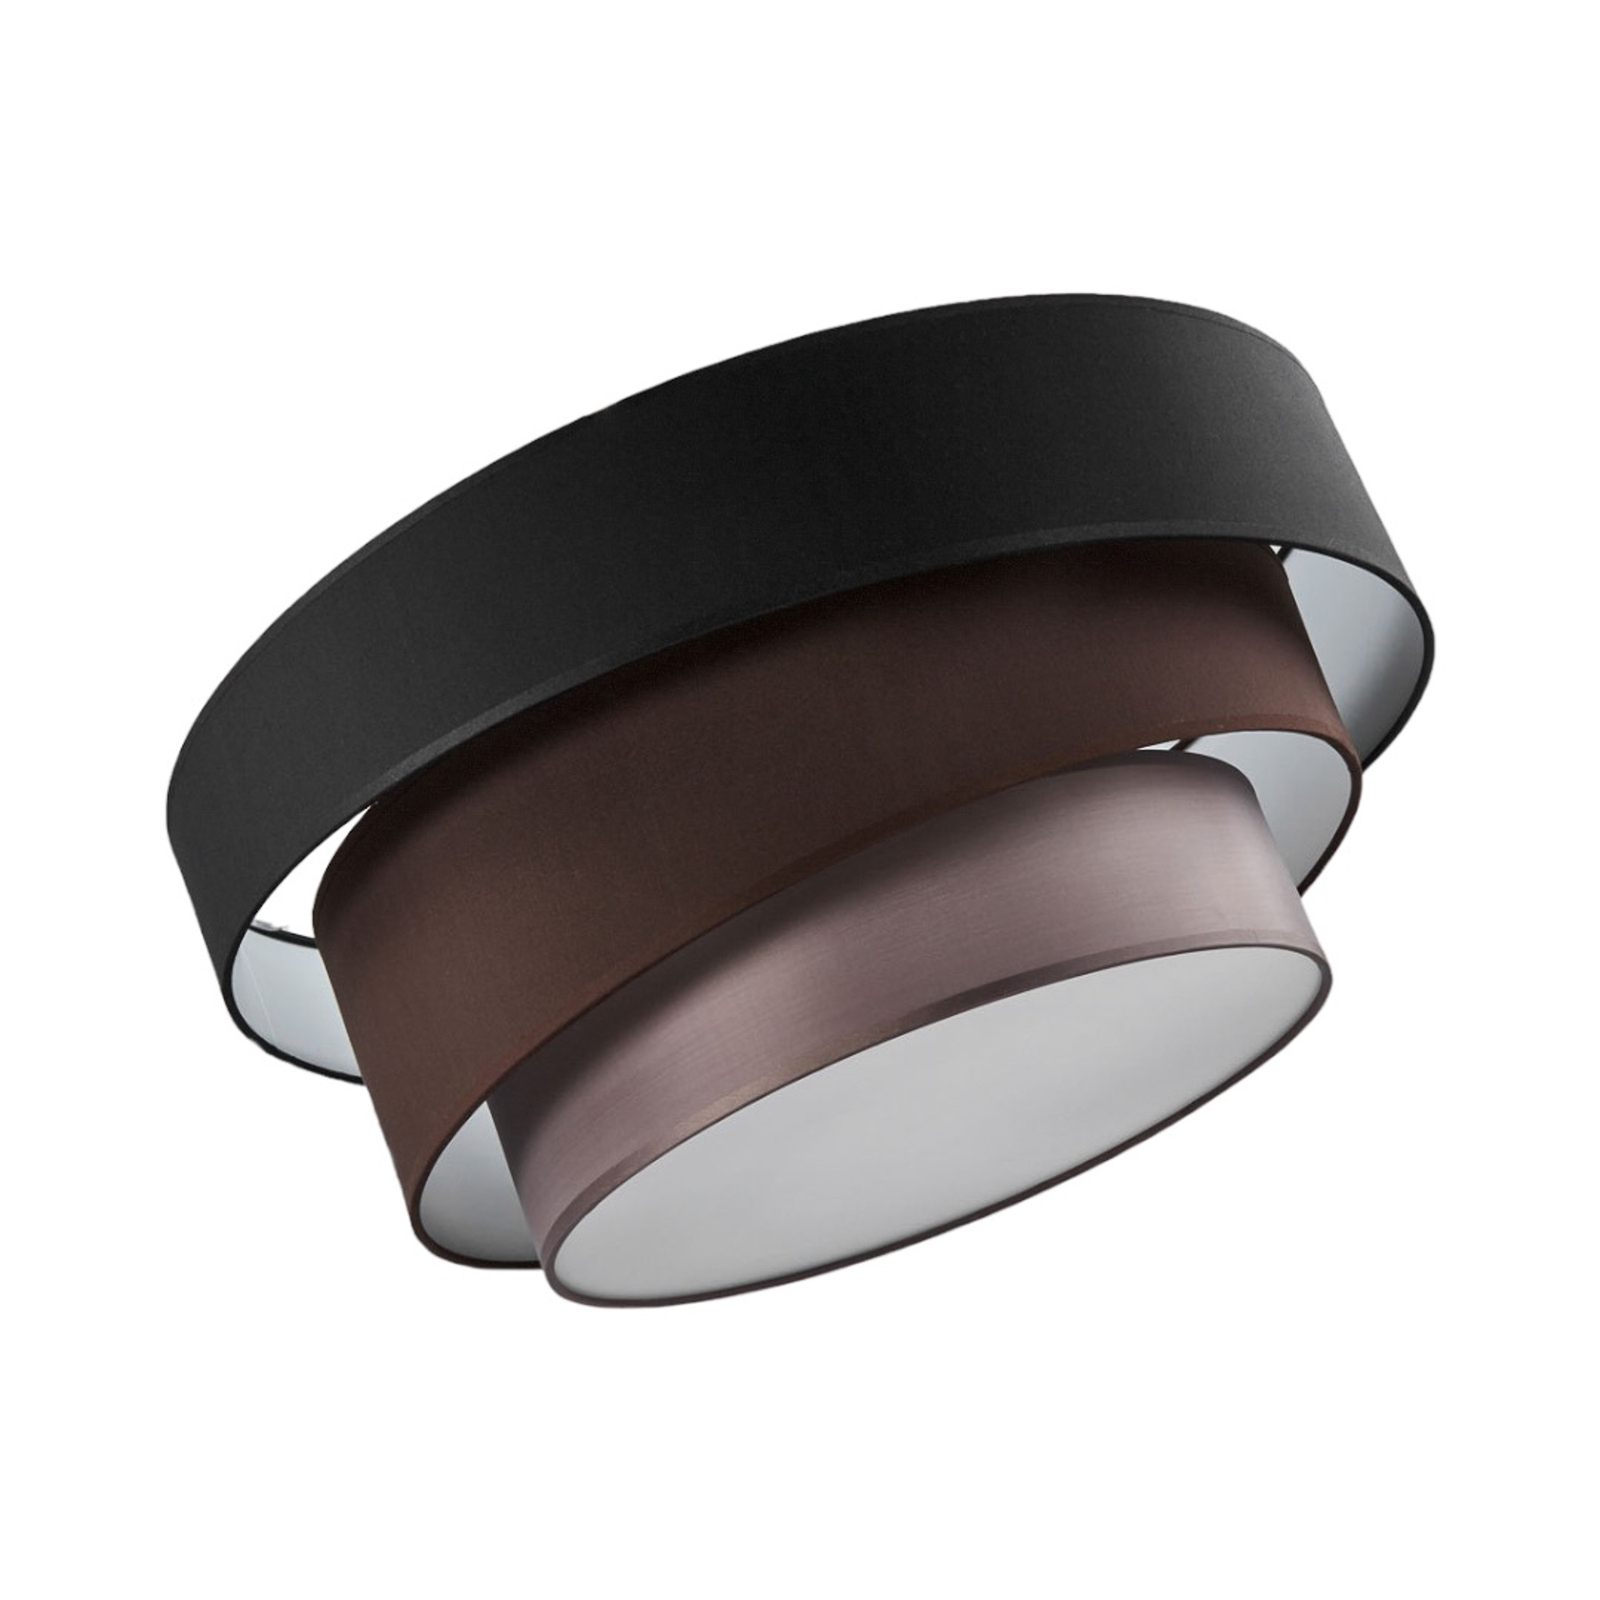 Attractive ceiling lamp Melia, black and brown